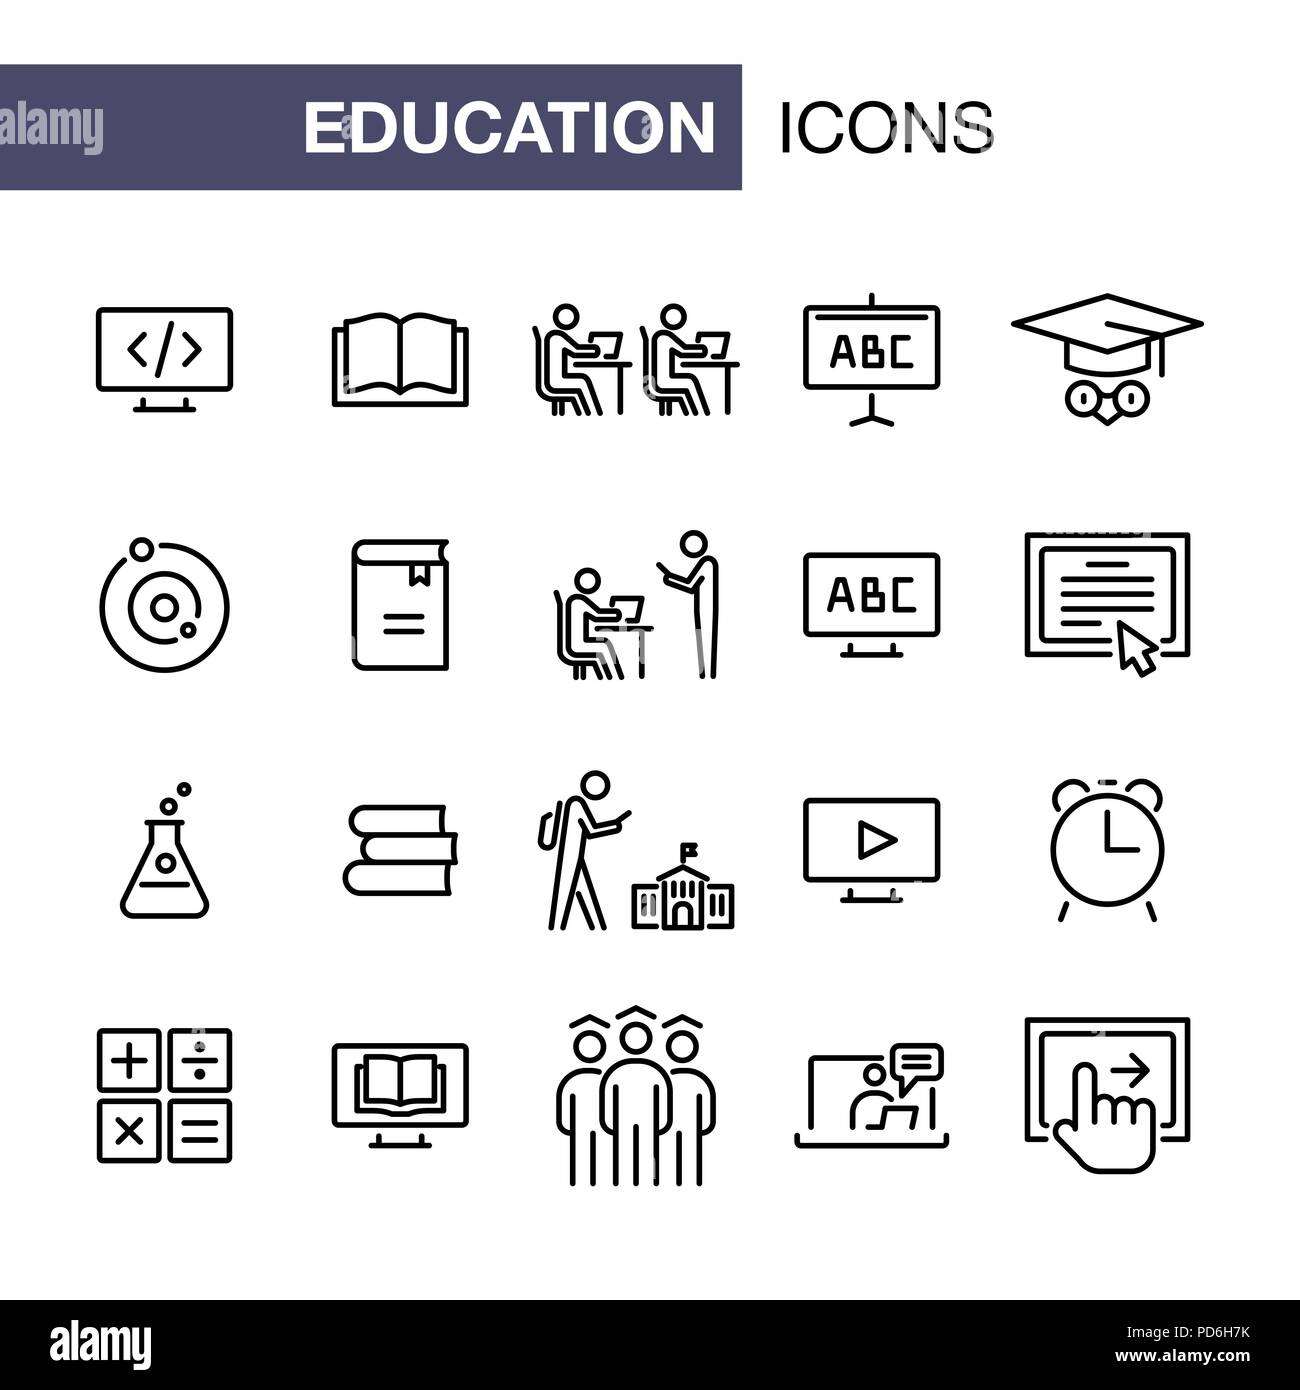 Education icons set simple flat style outline illustration. Stock Vector